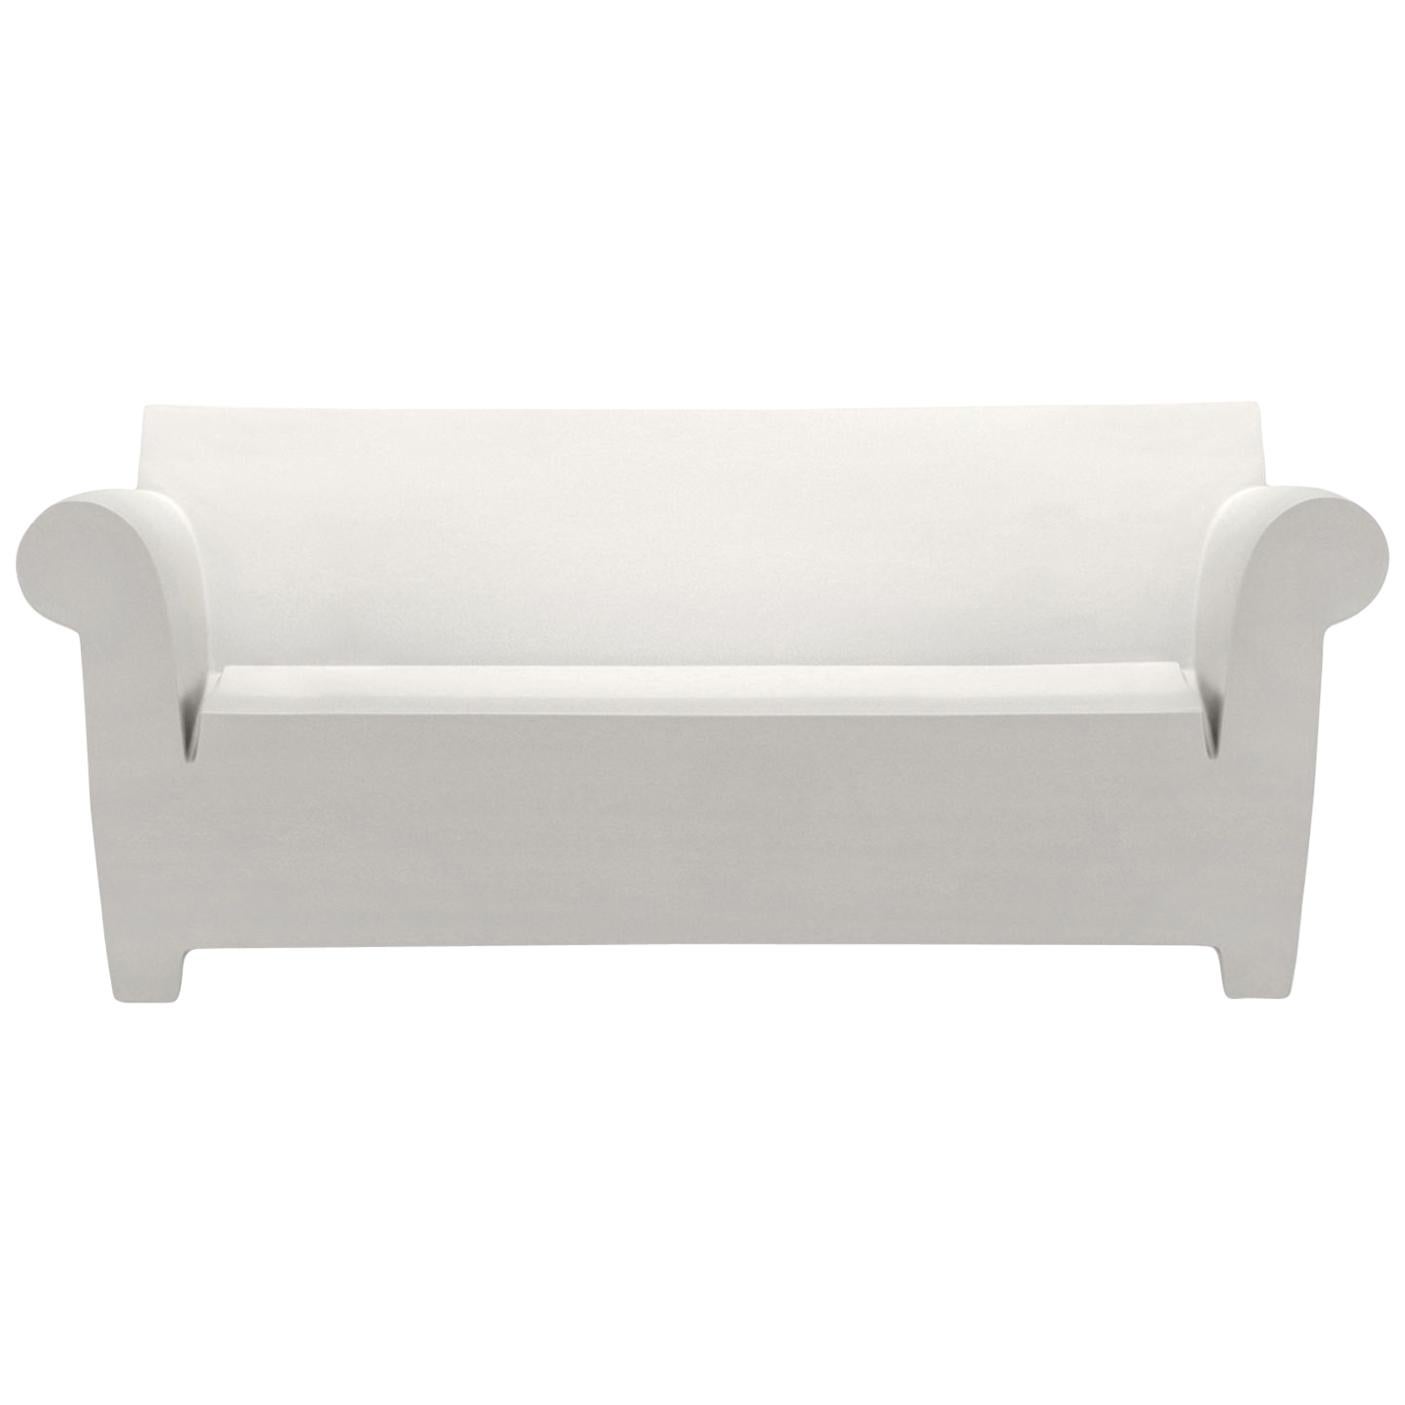 What sizes do loveseats come in?